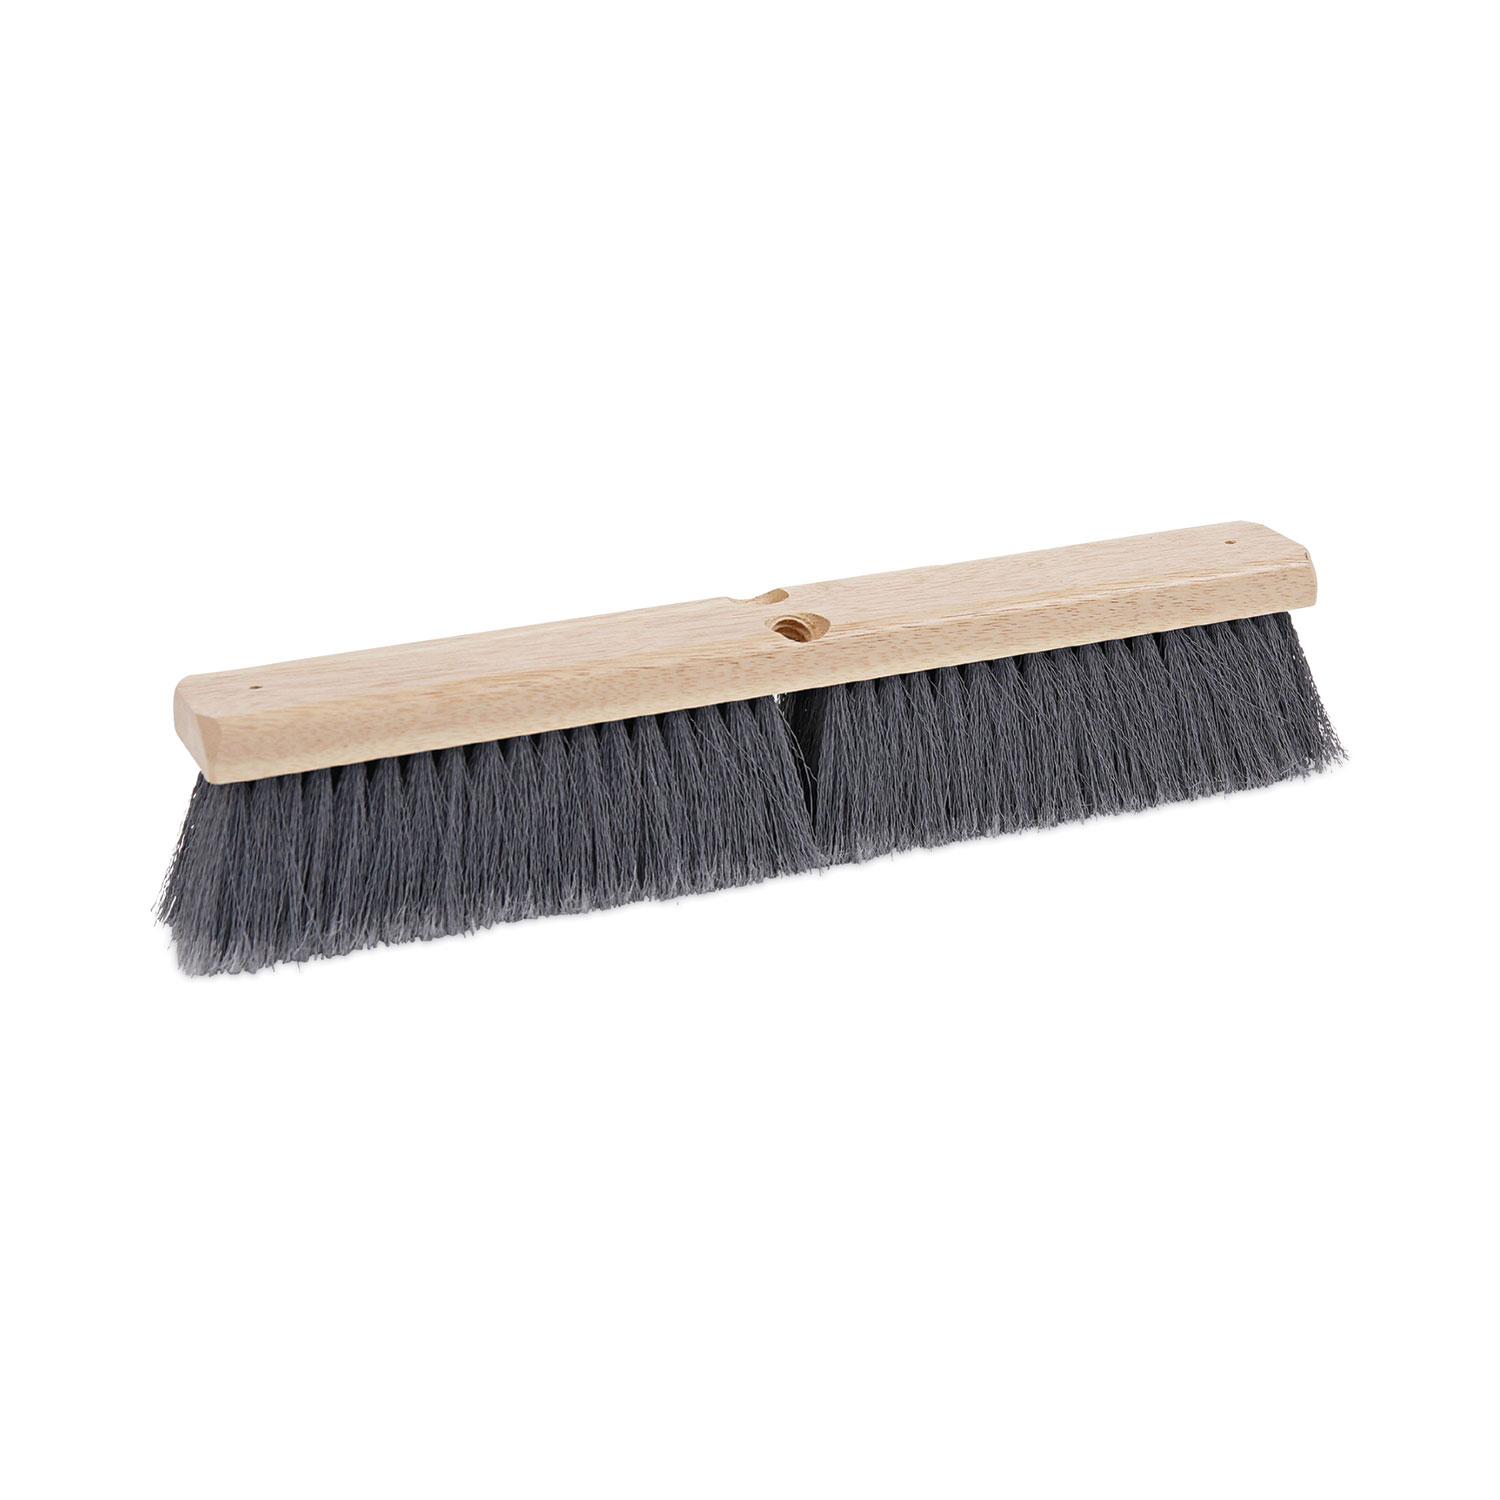 NATURAL 100% WOODEN HAND CLEANING BRUSH Stiff Hard Bristle Sweeping  Scrubbing